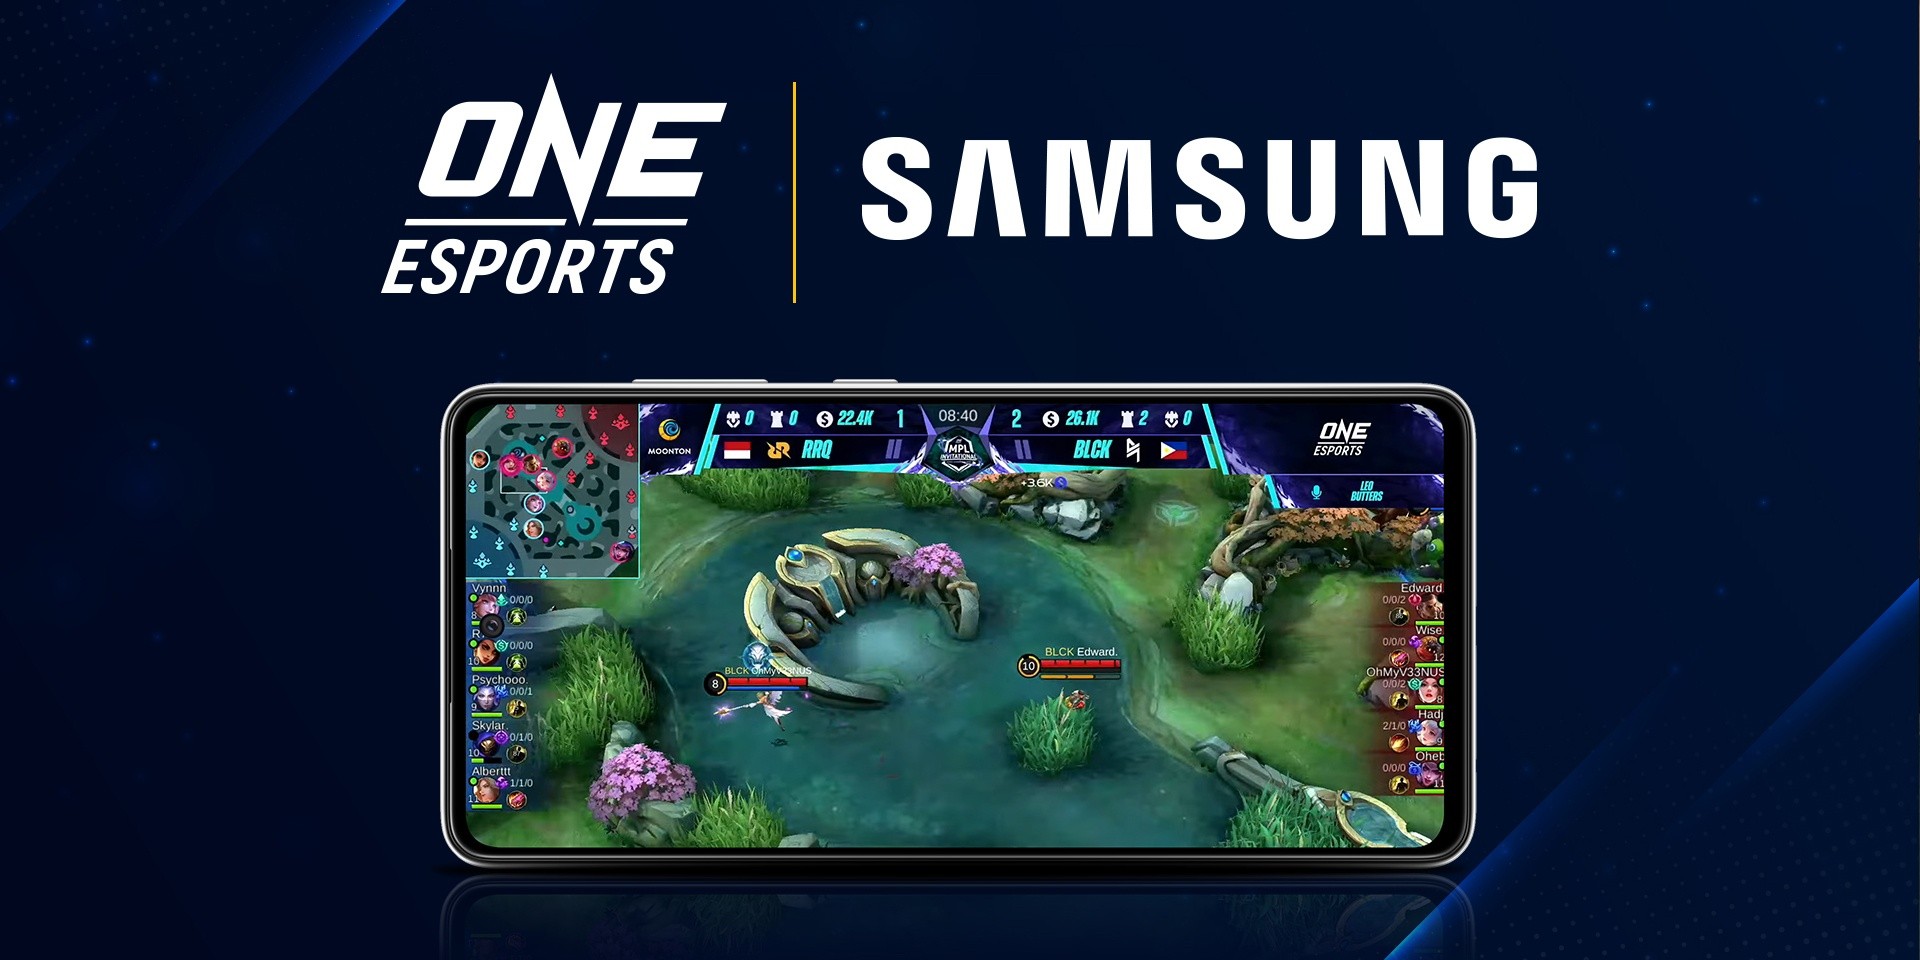 ONE Esports and Samsung partner to launch exclusive mobile app